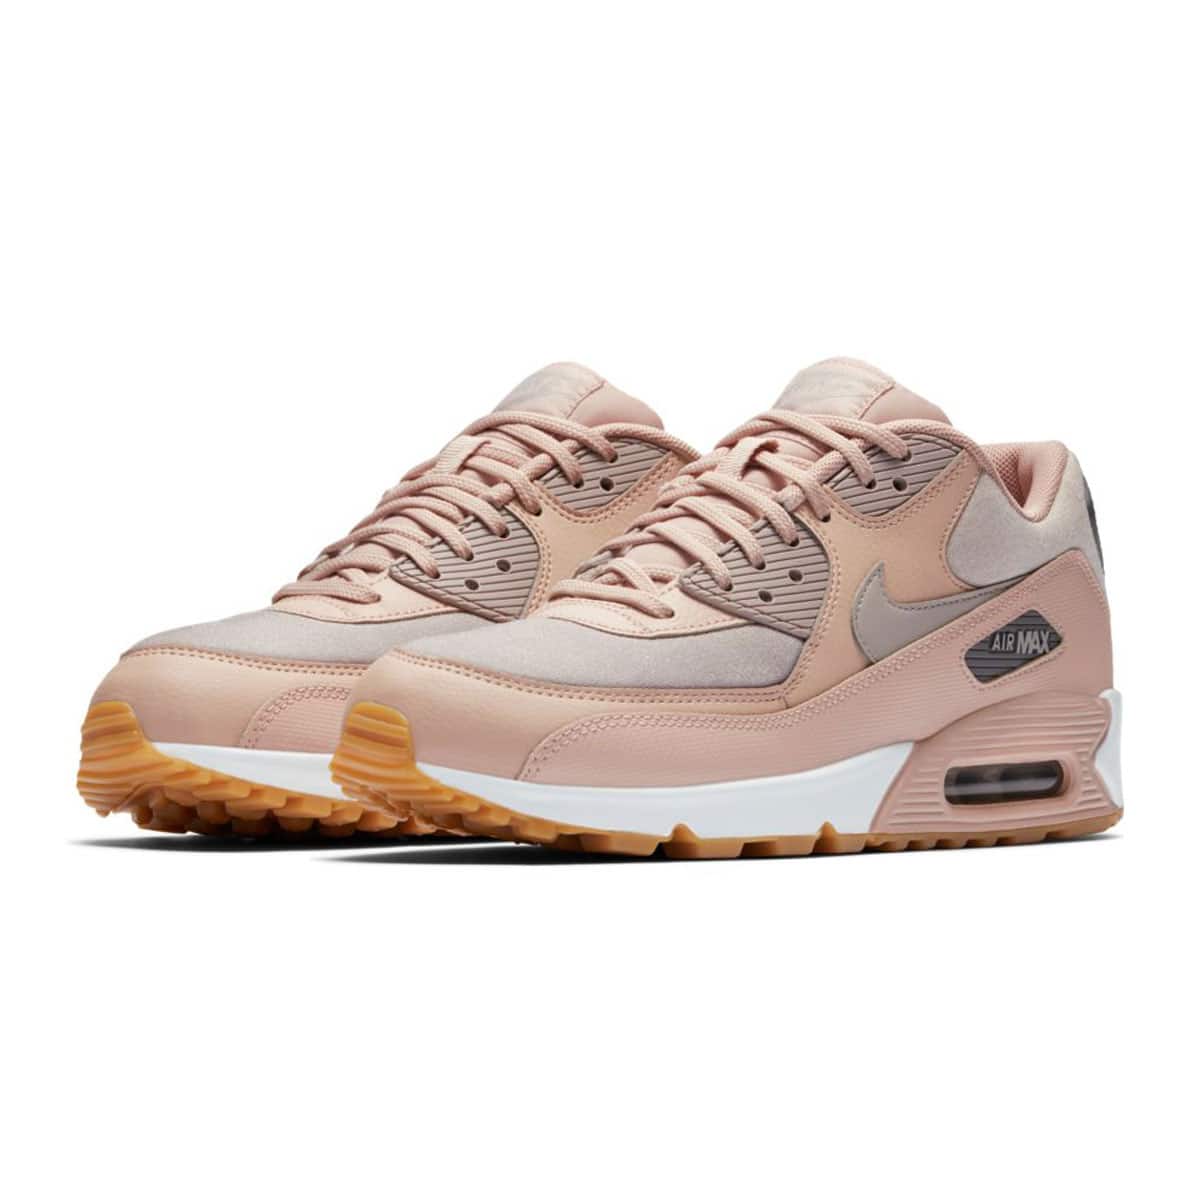 NIKE WMNS AIR MAX 90 PARTICLE BEIGE 